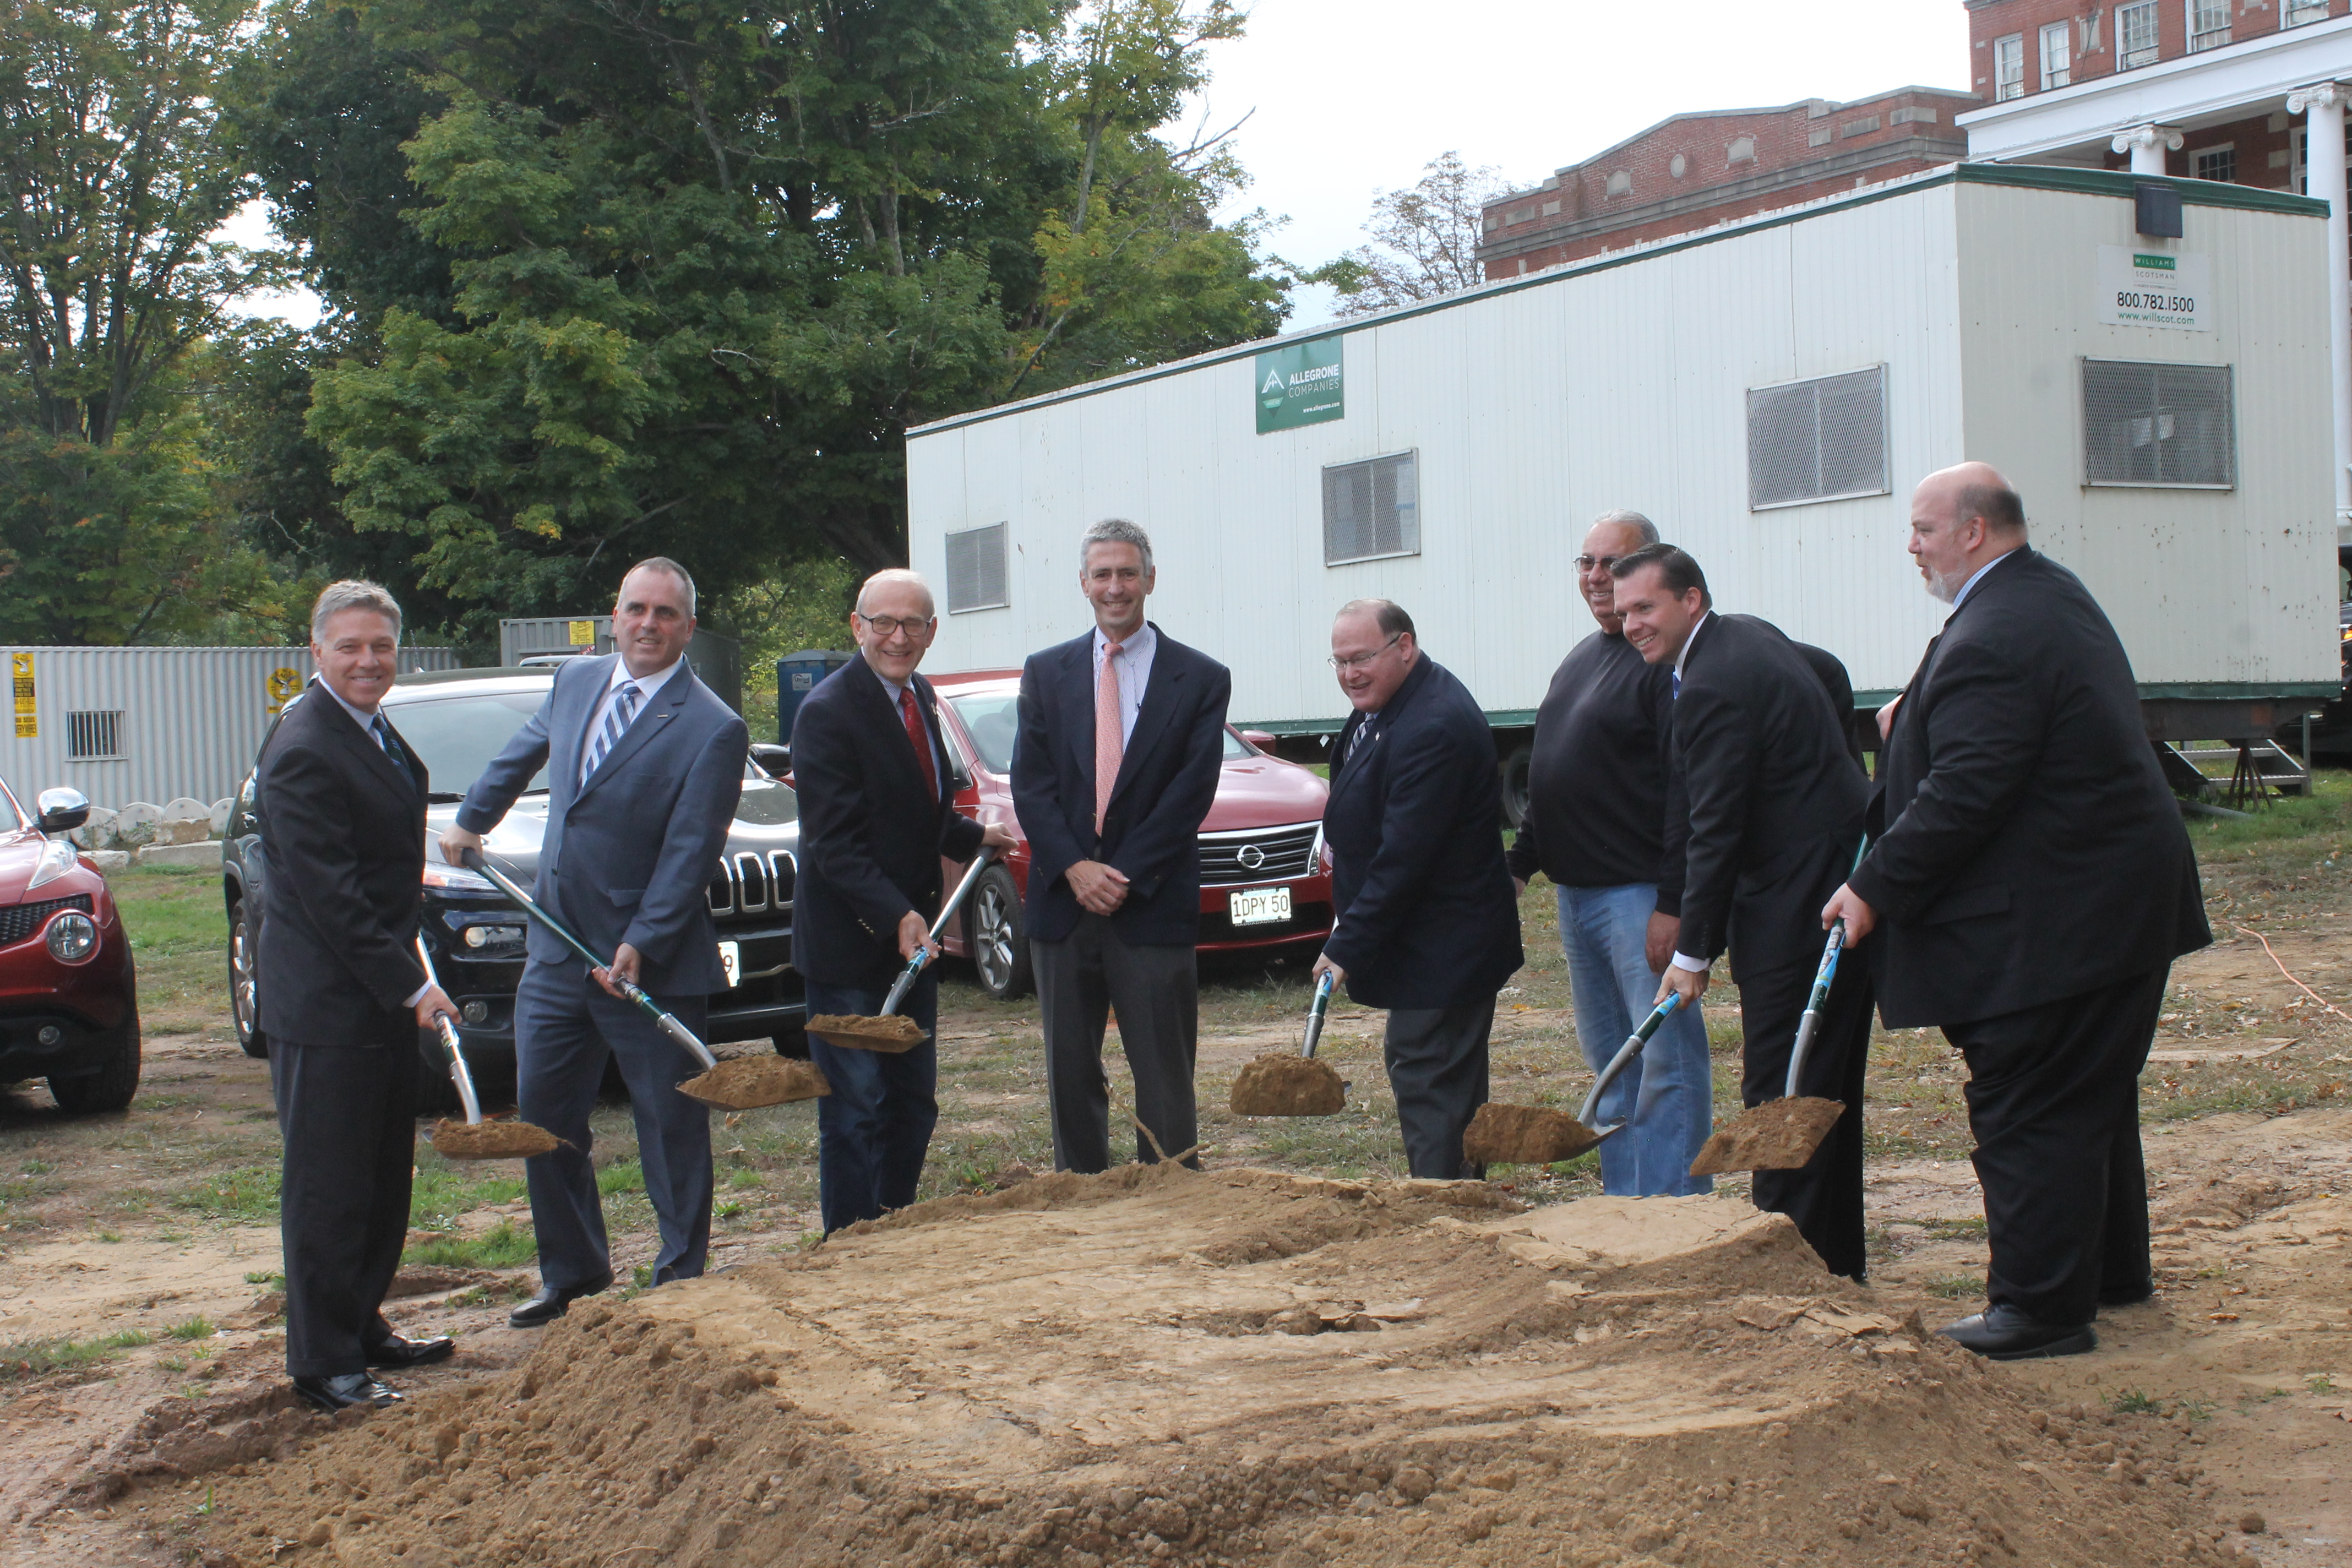 Left to Right: Girard "Jerry" Sargent of Citizens Bank, Bruce Buckley of Soldier On, Agawam City Councilor George Bitzas, Bruce Sorota of Stratford Capital Group, Mayor Richard Cohen, Agawam City Councilor Robert Rossi, State Representative Nicholas Boldyga, State Senator Don Humason